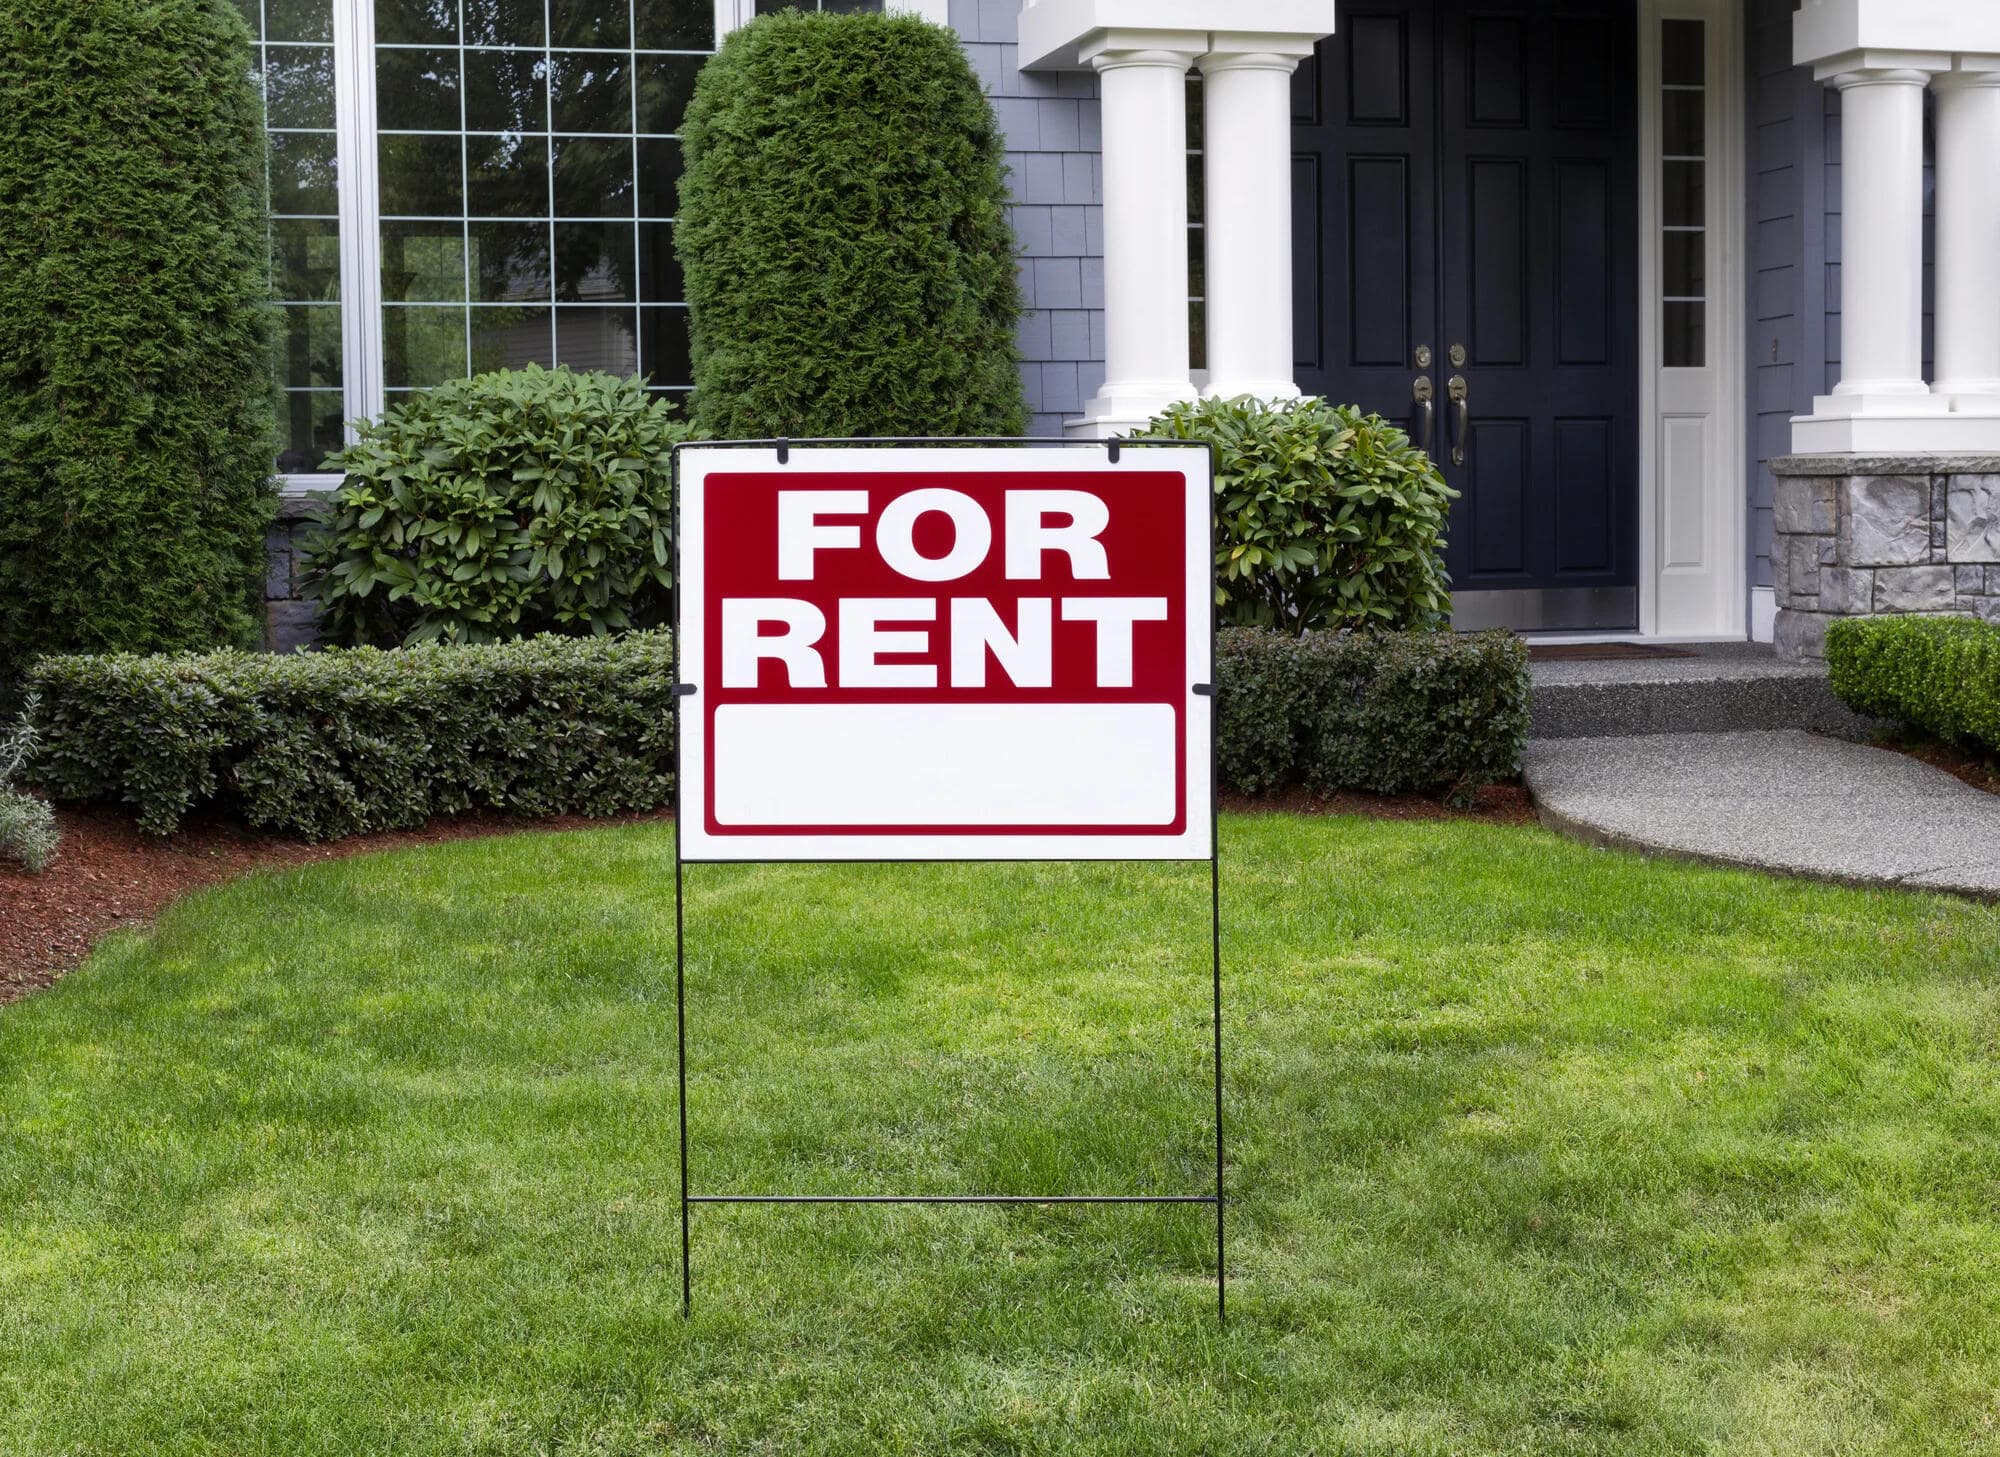 4 Property Marketing Tips to Attract Tenants in a Tough Albany Market